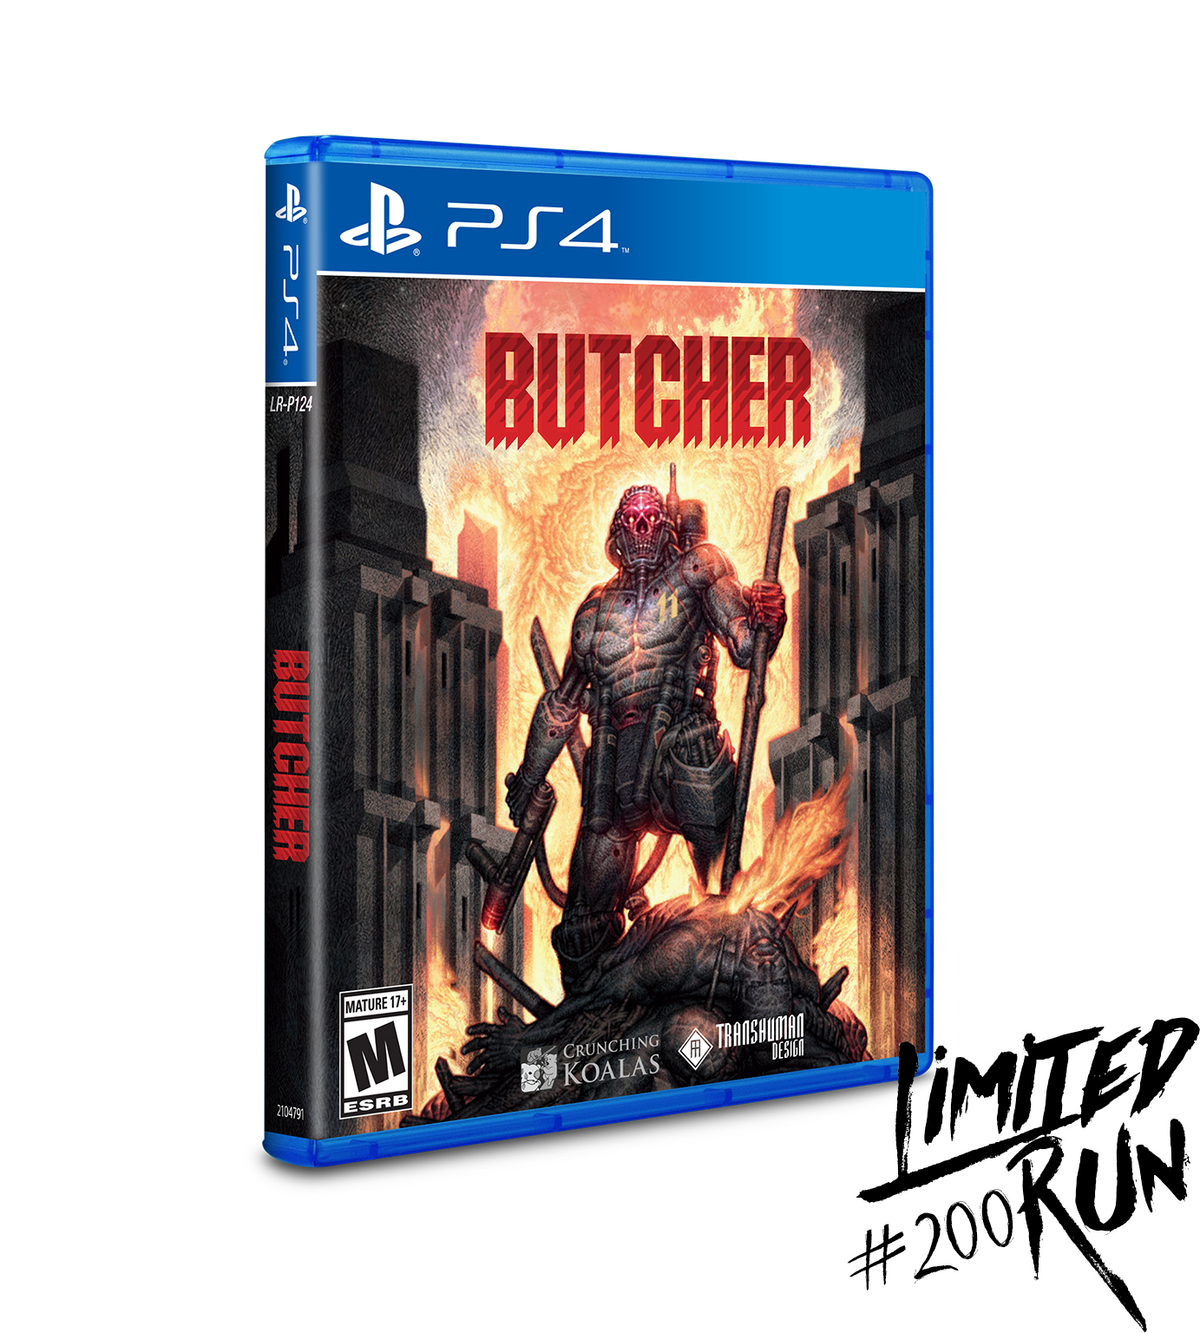 Limited Run #200: Butcher (PS4)